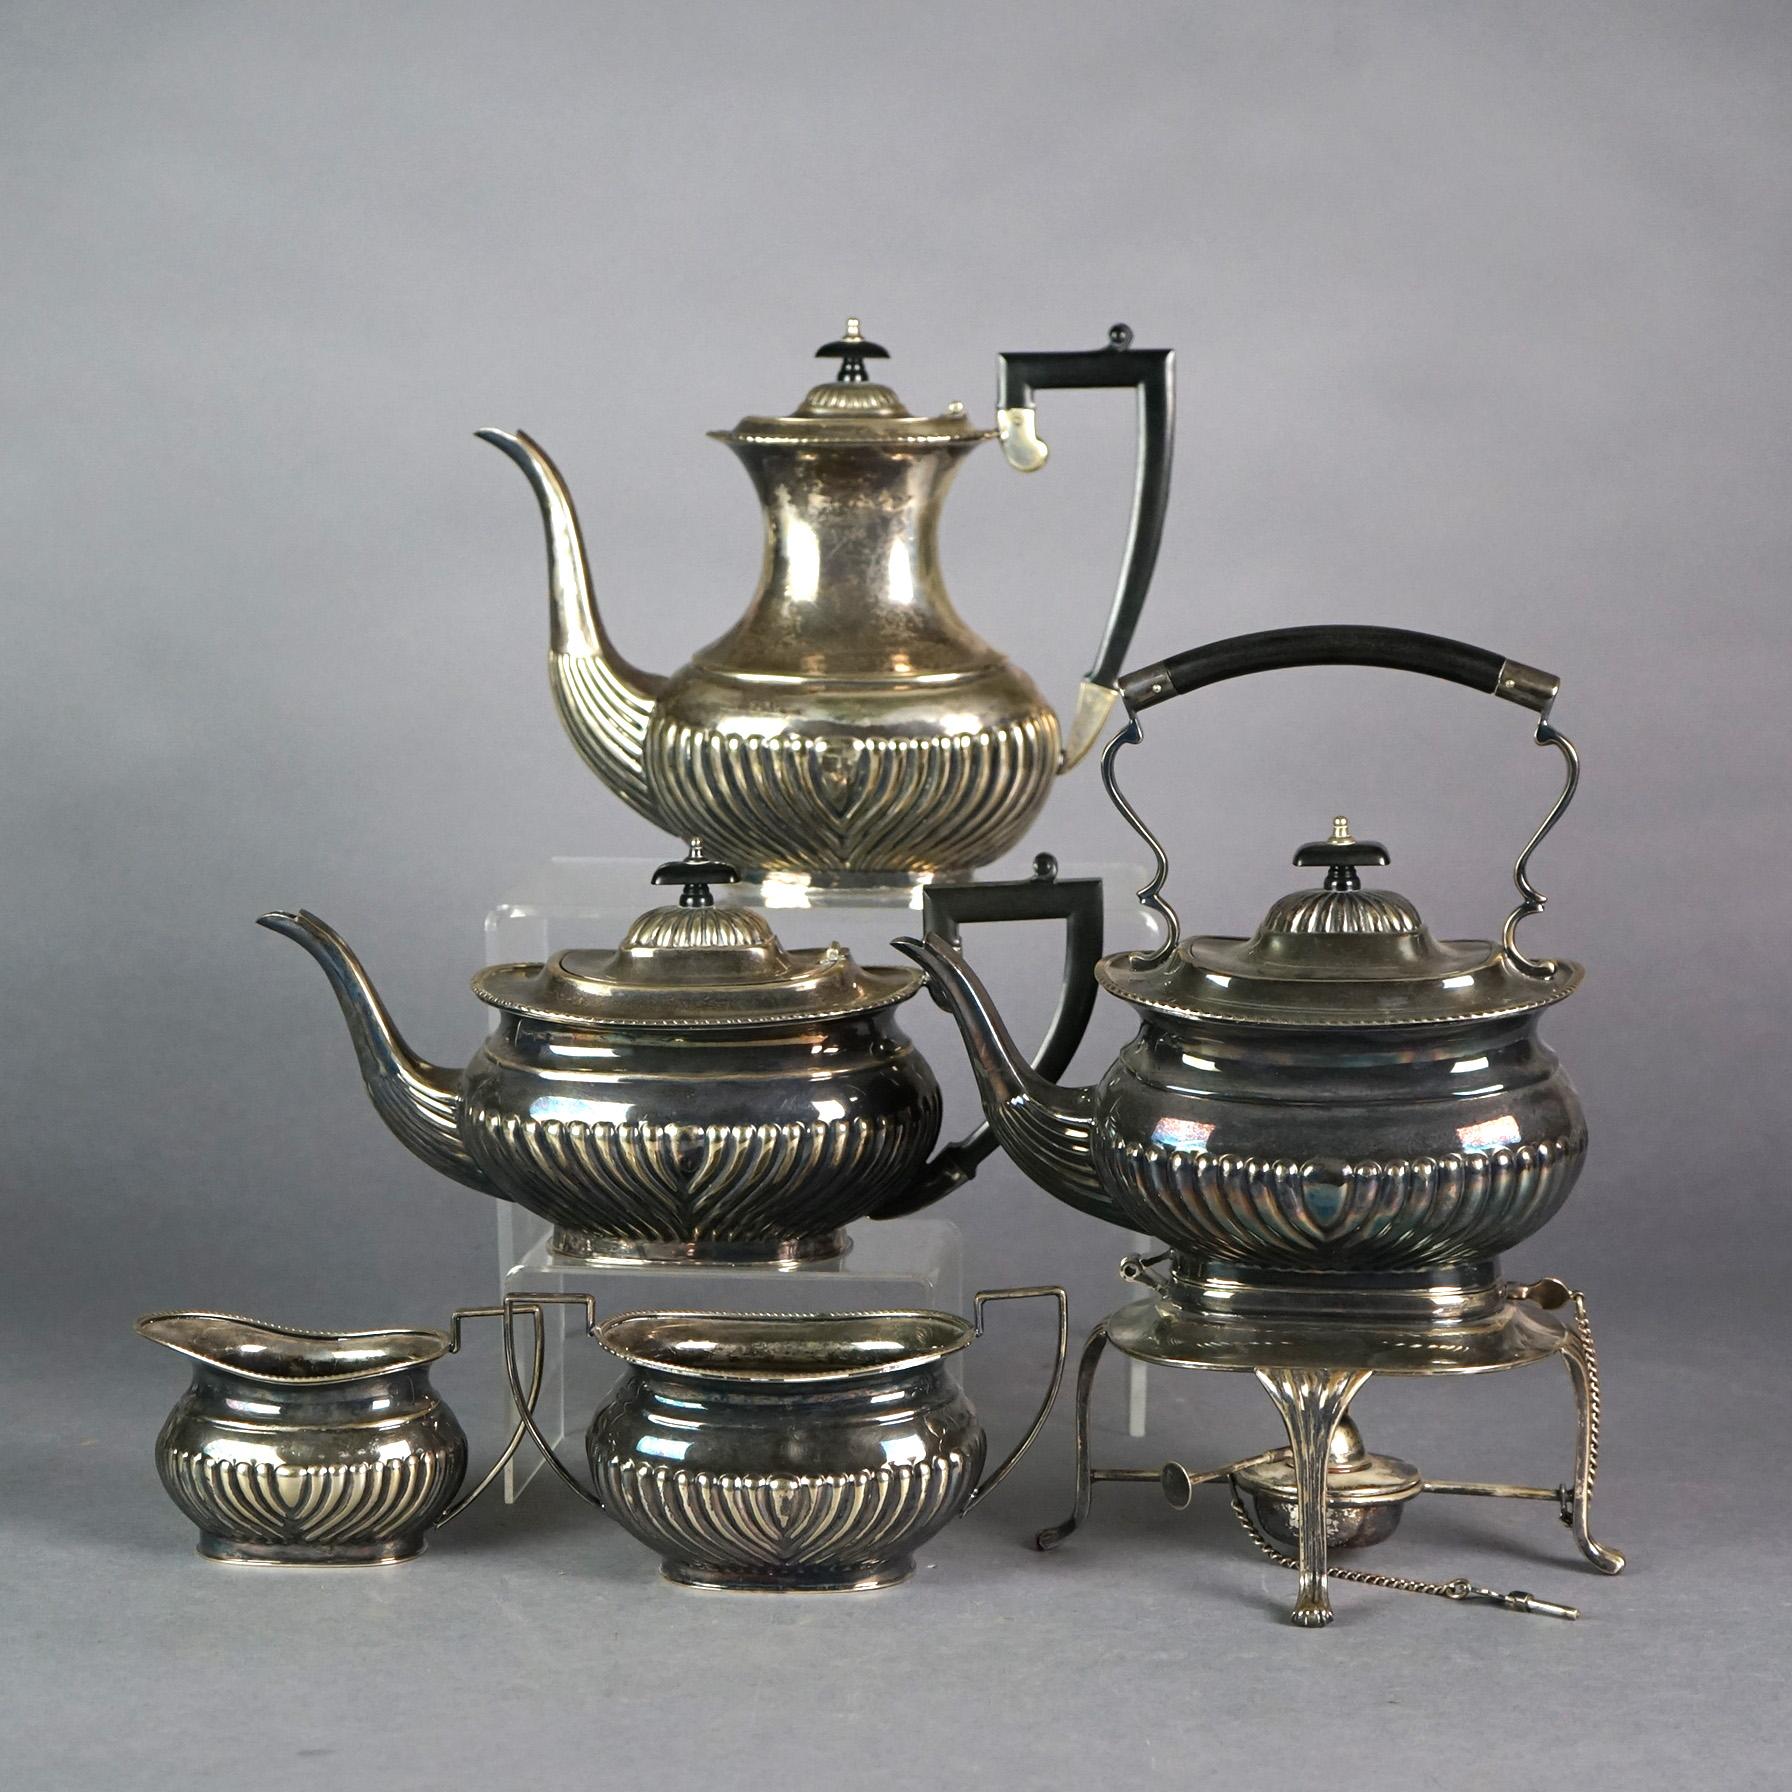 Antique Five-Piece English Regency Style Sheffield Silver Plate & Melon Bottom Tea Set, Maker Mark as Photographed,  19thC

Measures - Teapot with warmer 13